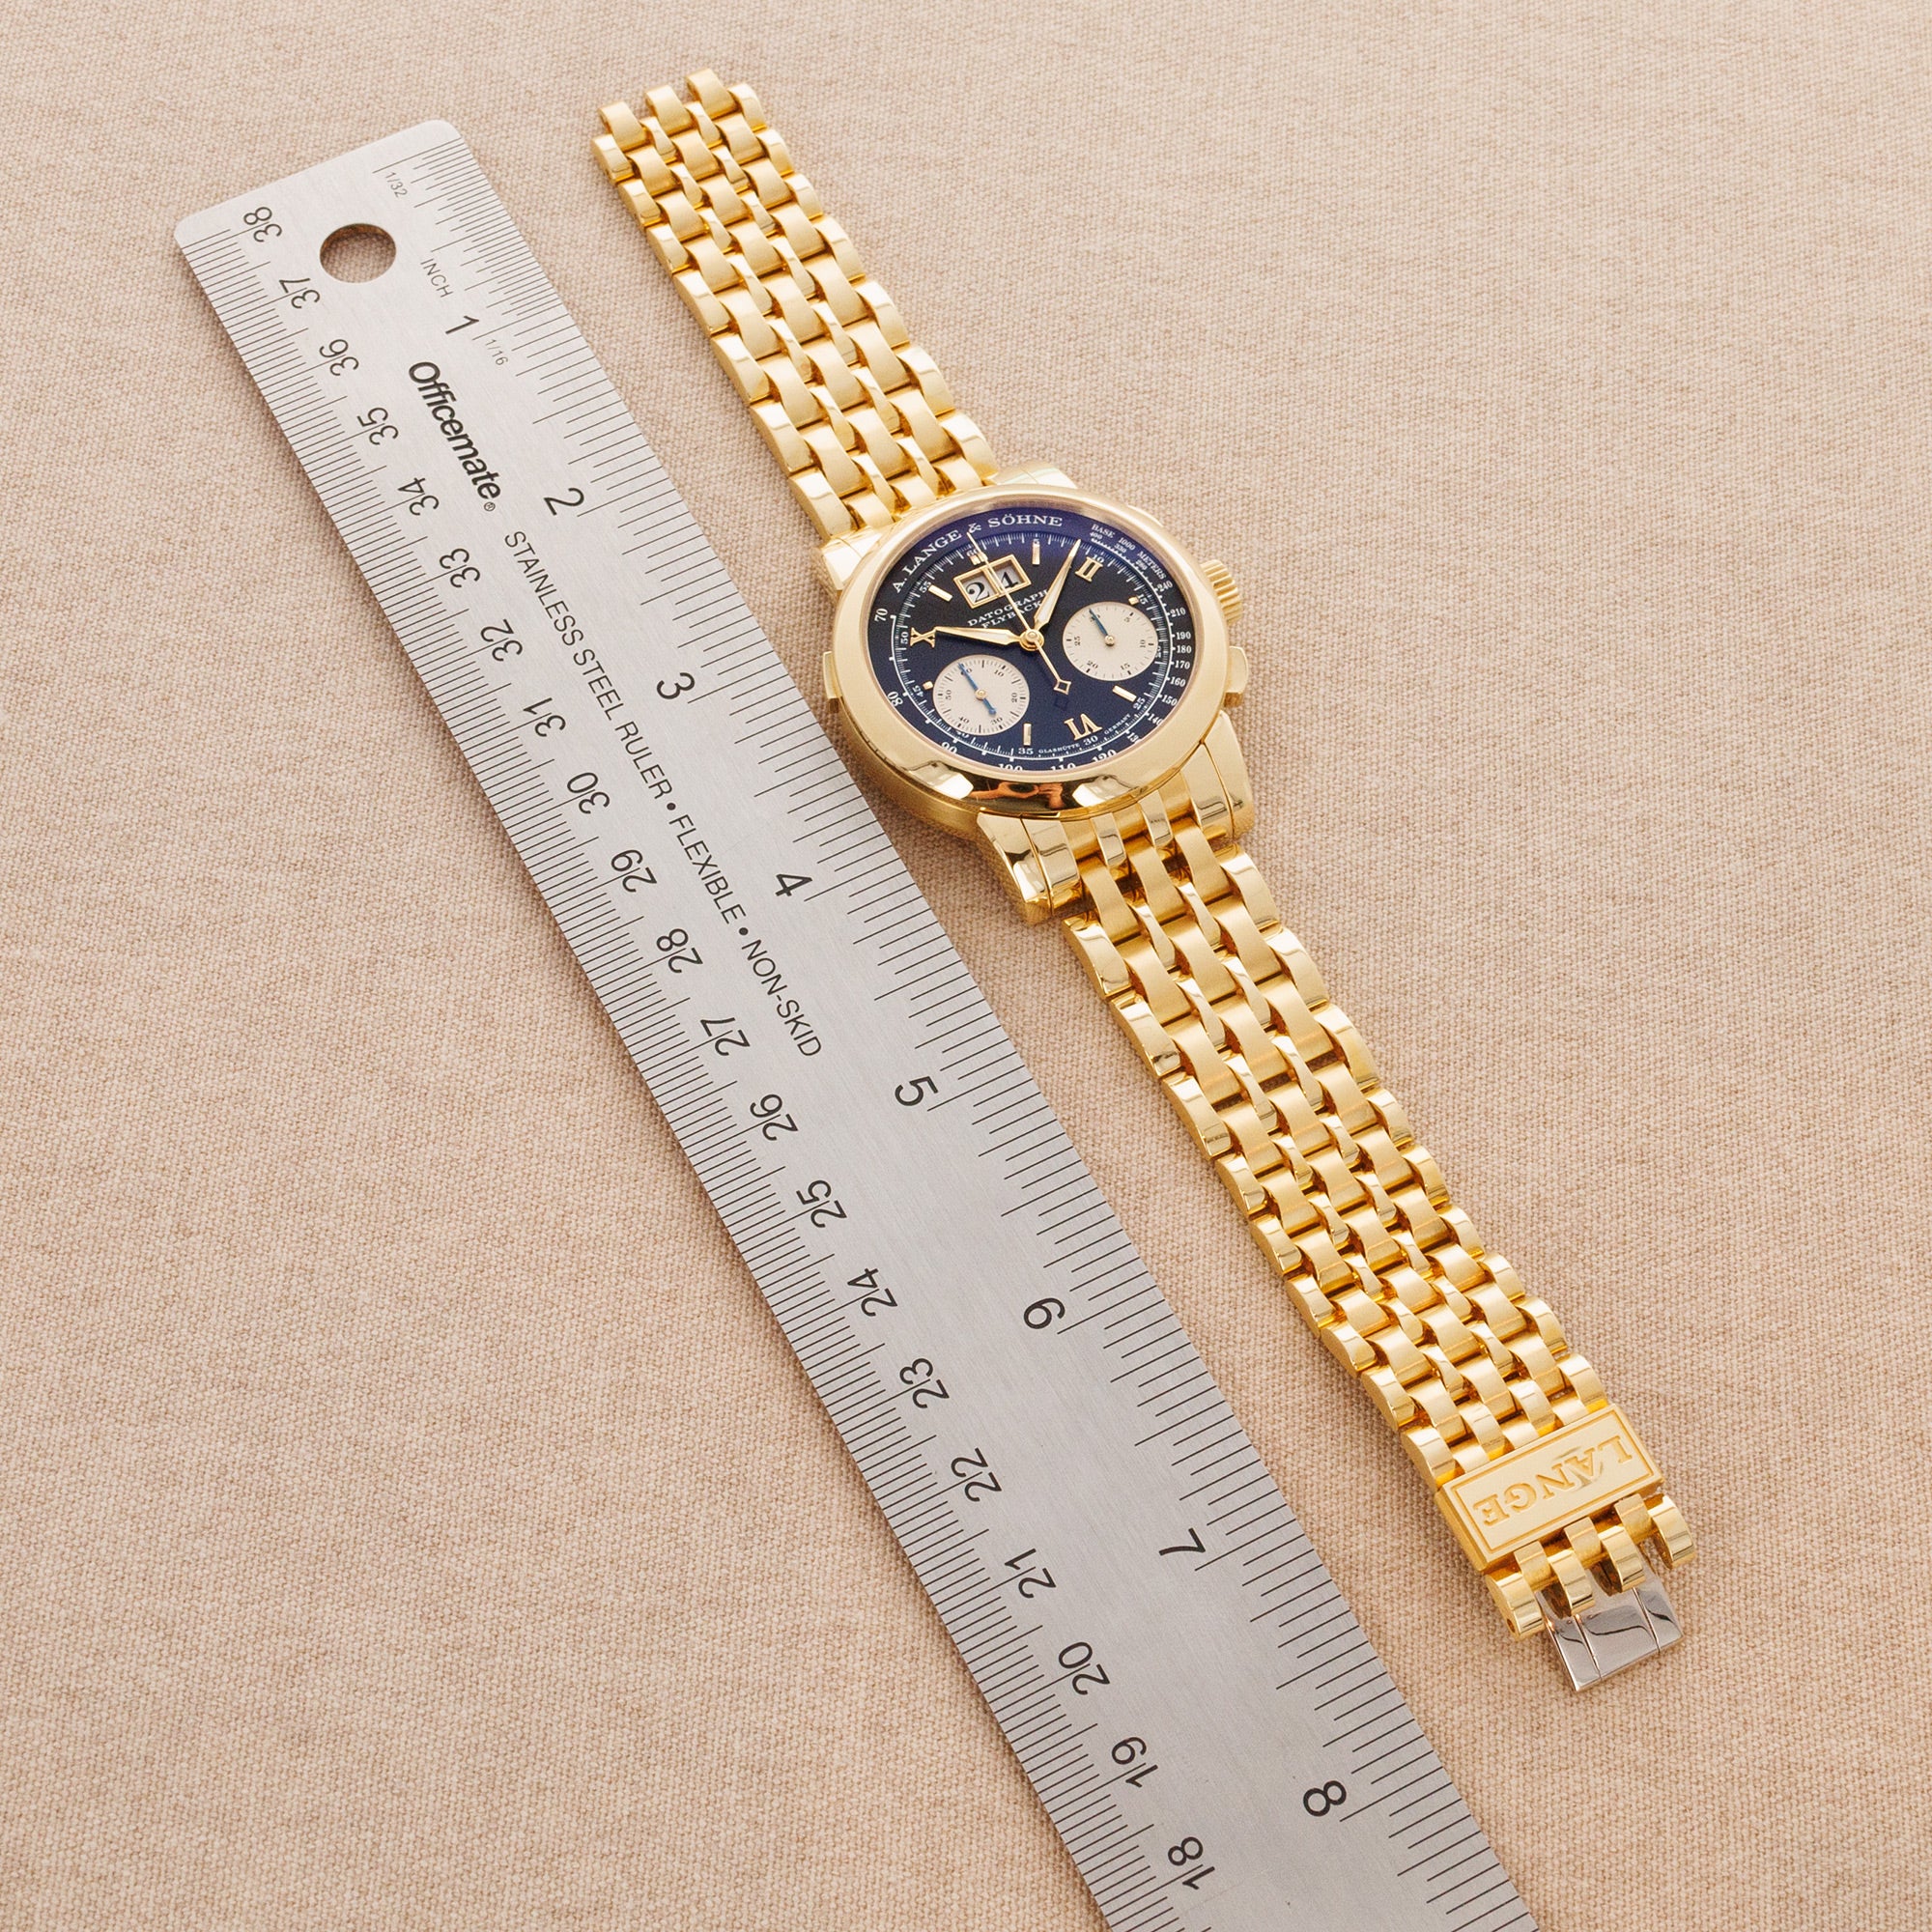 A. Lange &amp; Sohne - A. Lange &amp; Sohne Yellow Gold Datograph Watch Ref. 403.041 on Wellendorf Bracelet - The Keystone Watches